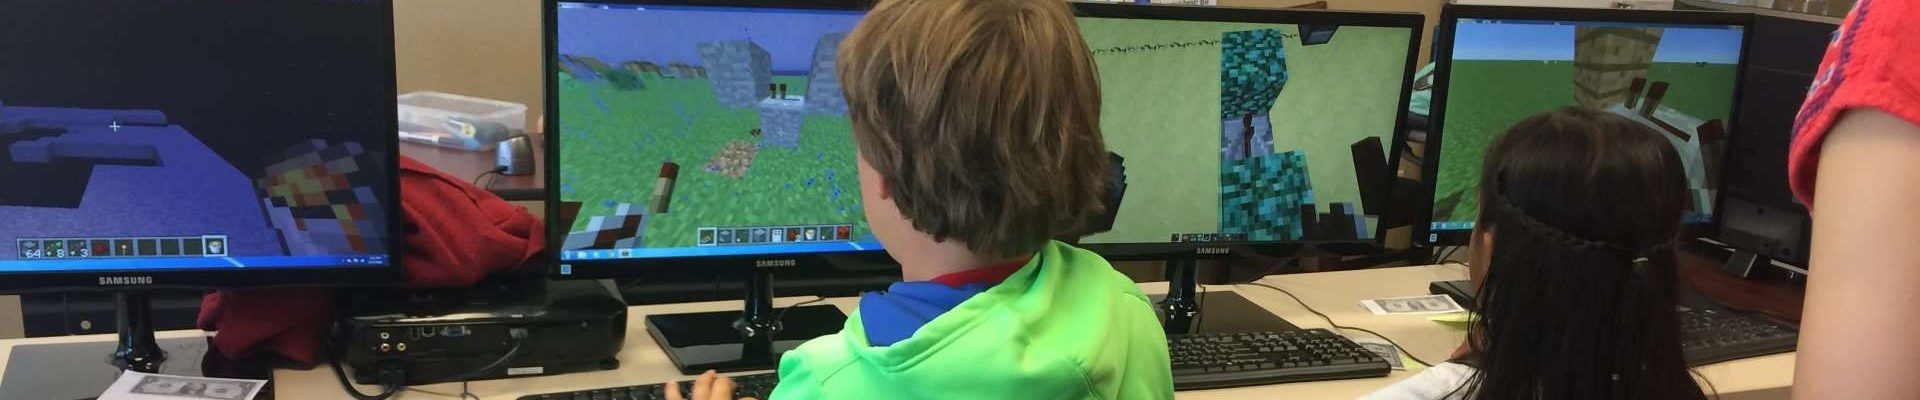 Campers during a Minecraft Camp at Vision Tech Camps Danville Center